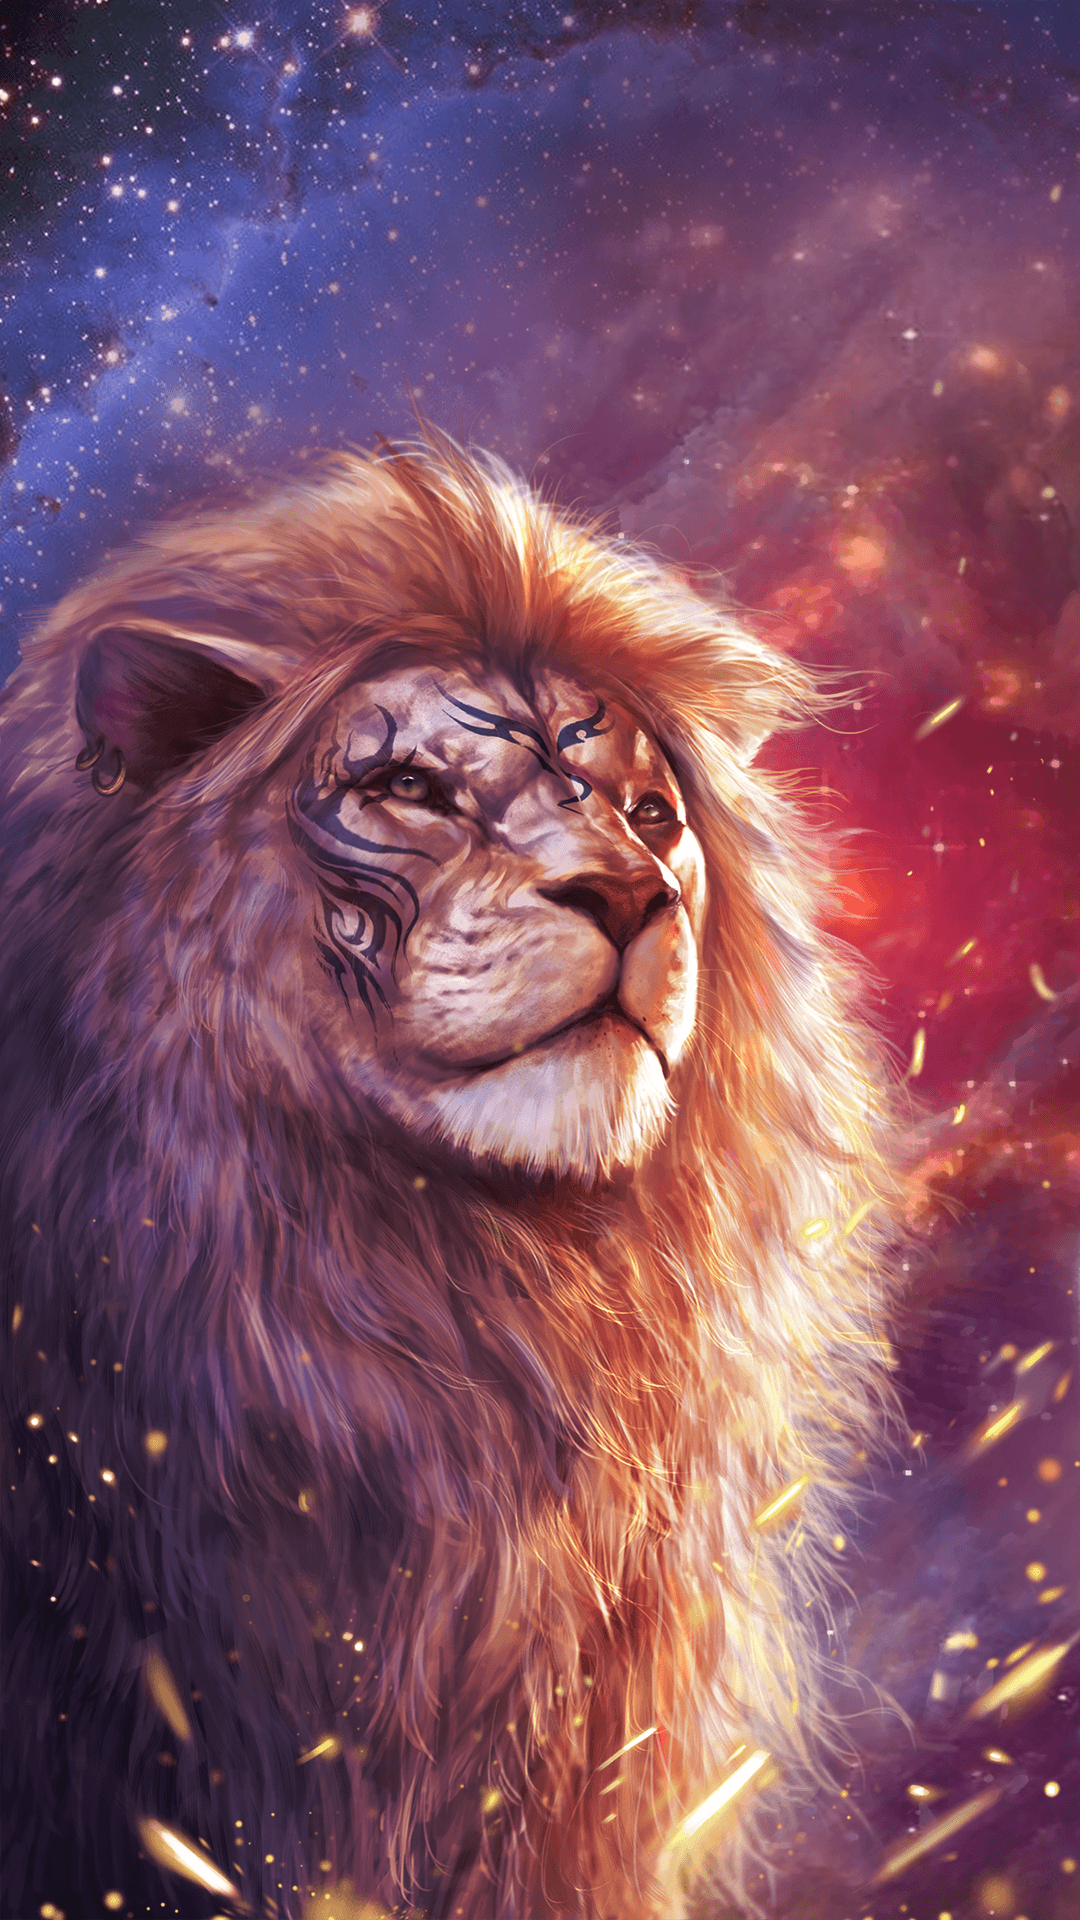 Wallpaper Hd Download For Android Mobile Of Lion